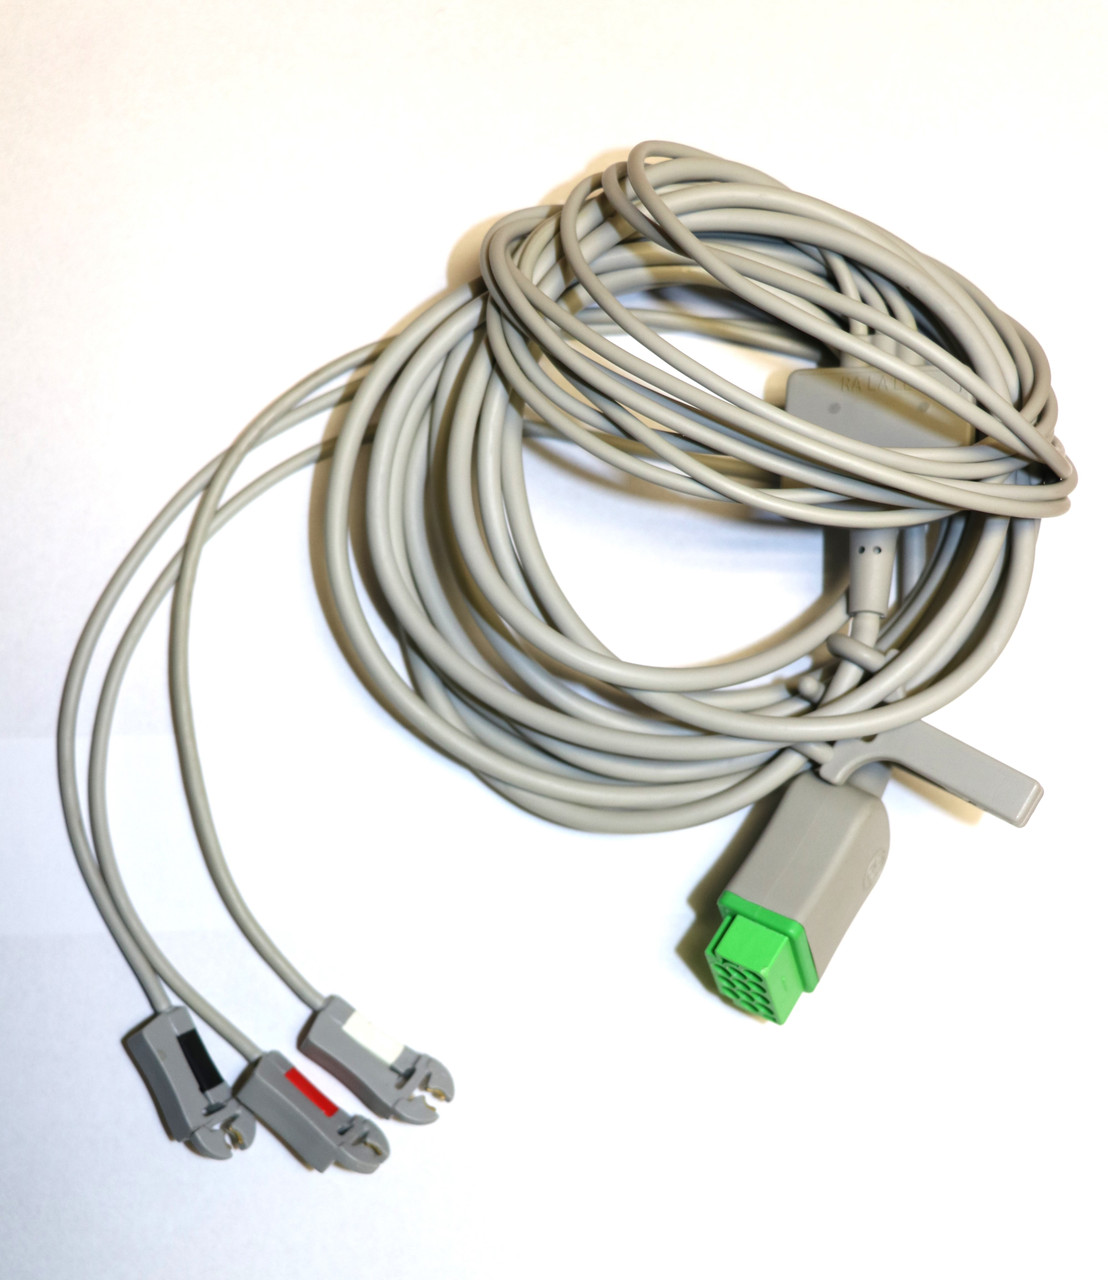 Multi-Link ECG Cable, 3-Lead Integrated with Grabber, Select, AHA 